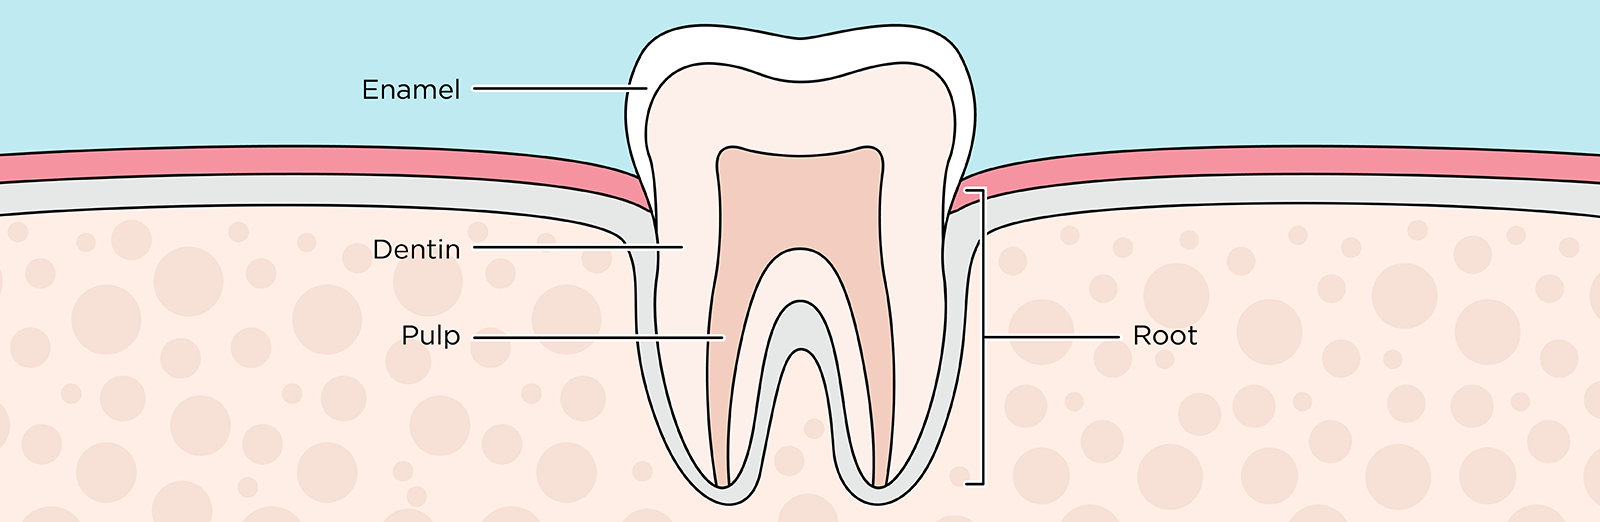 anatomy-of-a-tooth-icon-1600x522.webp